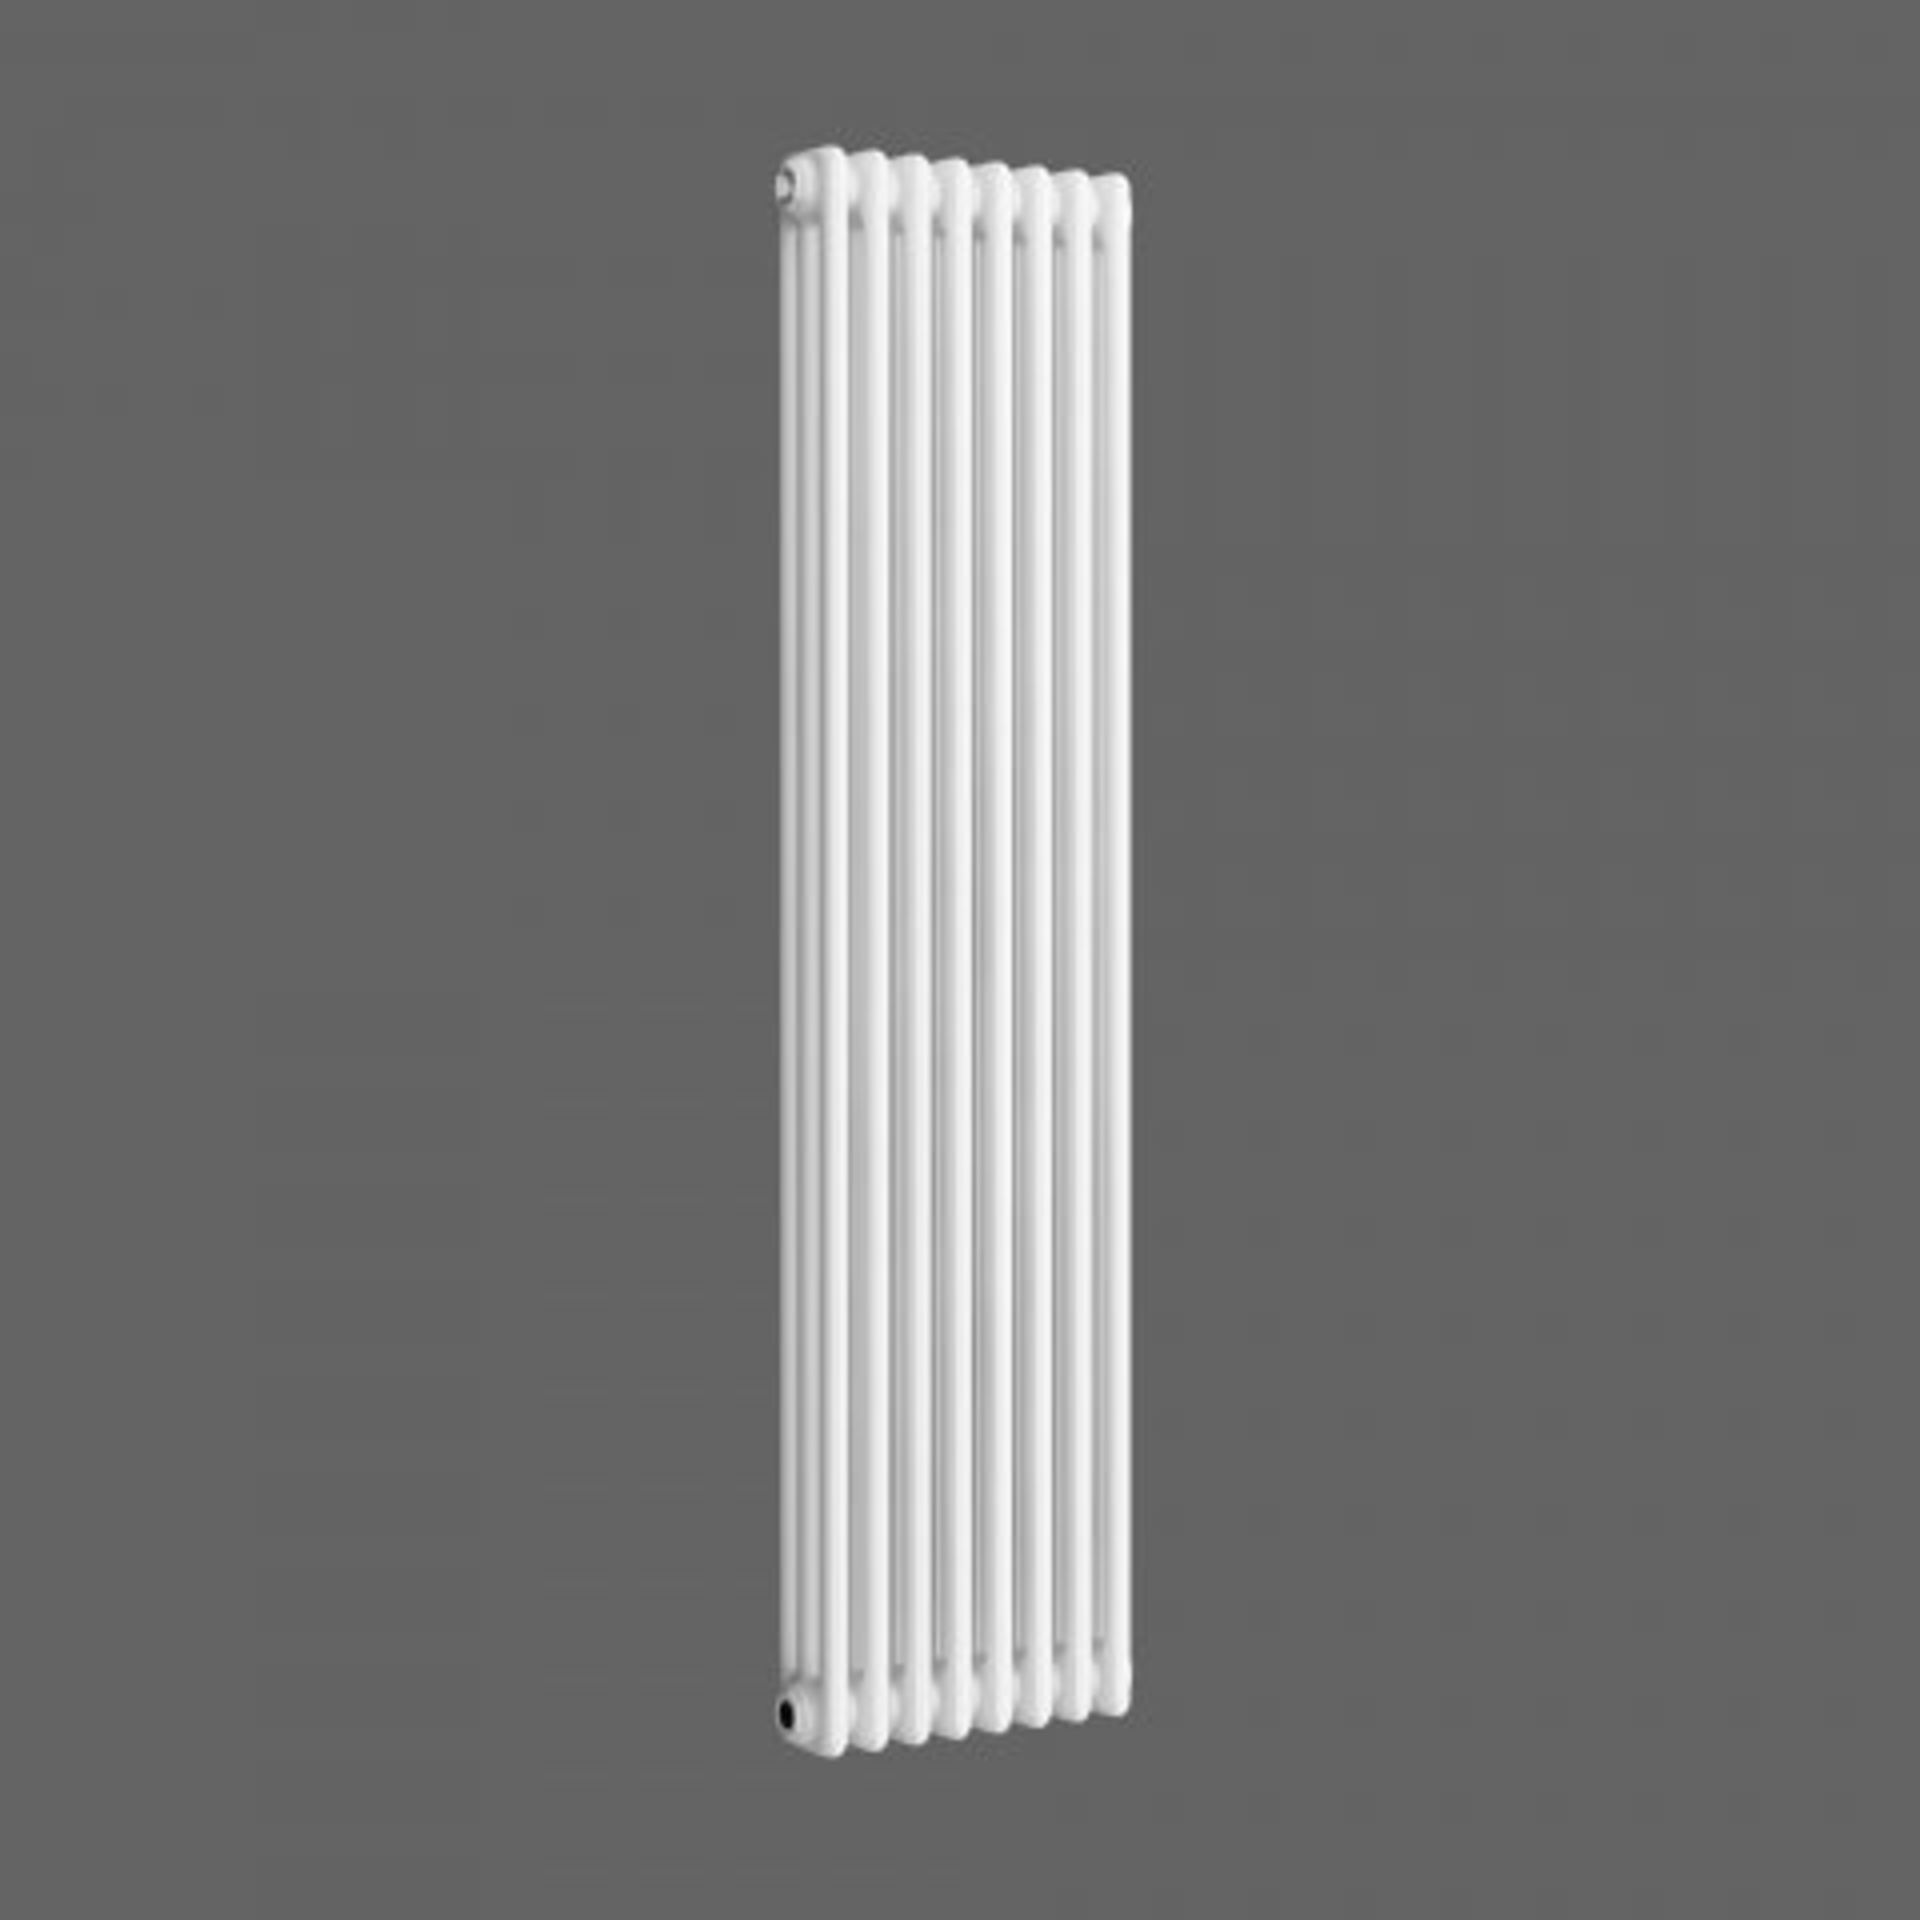 (N130) 1500x380mm White Triple Panel Vertical Colosseum Traditional Radiator. RRP £371.99. Classic - Image 3 of 5